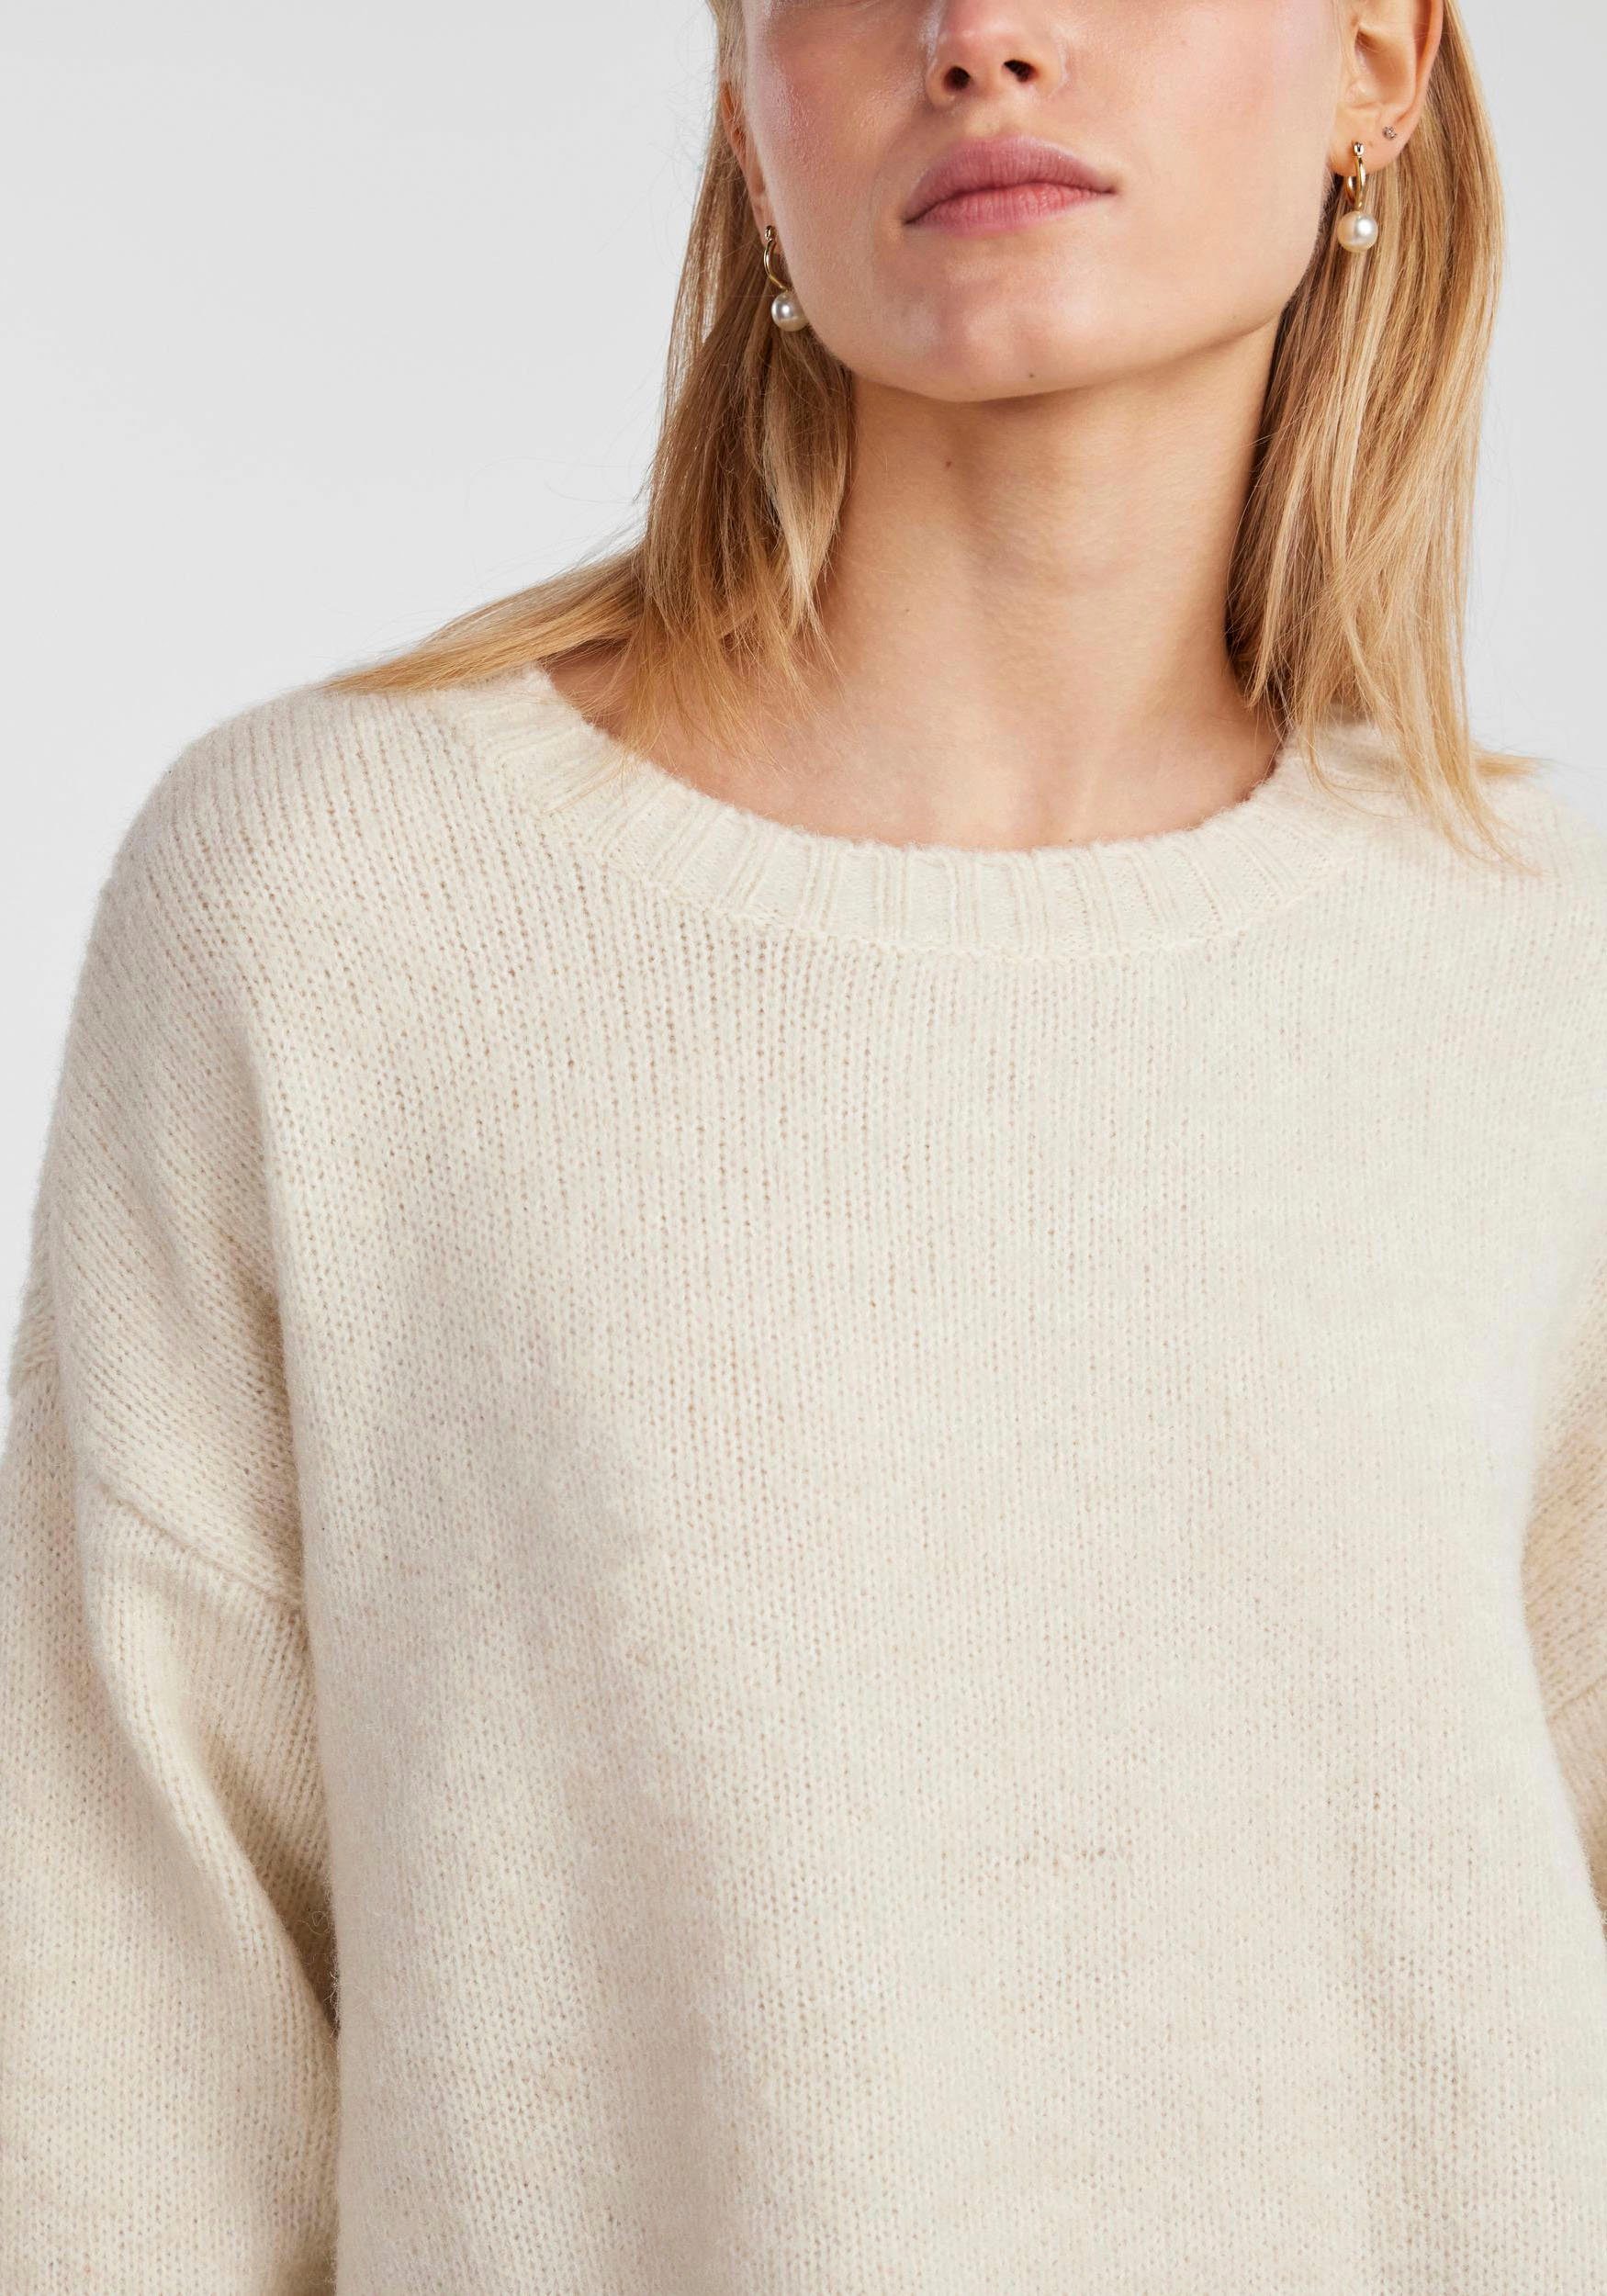 Oversized BC LOOSE KNIT Strickpullover NOOS PCNANCY pieces Birch O-NECK LS